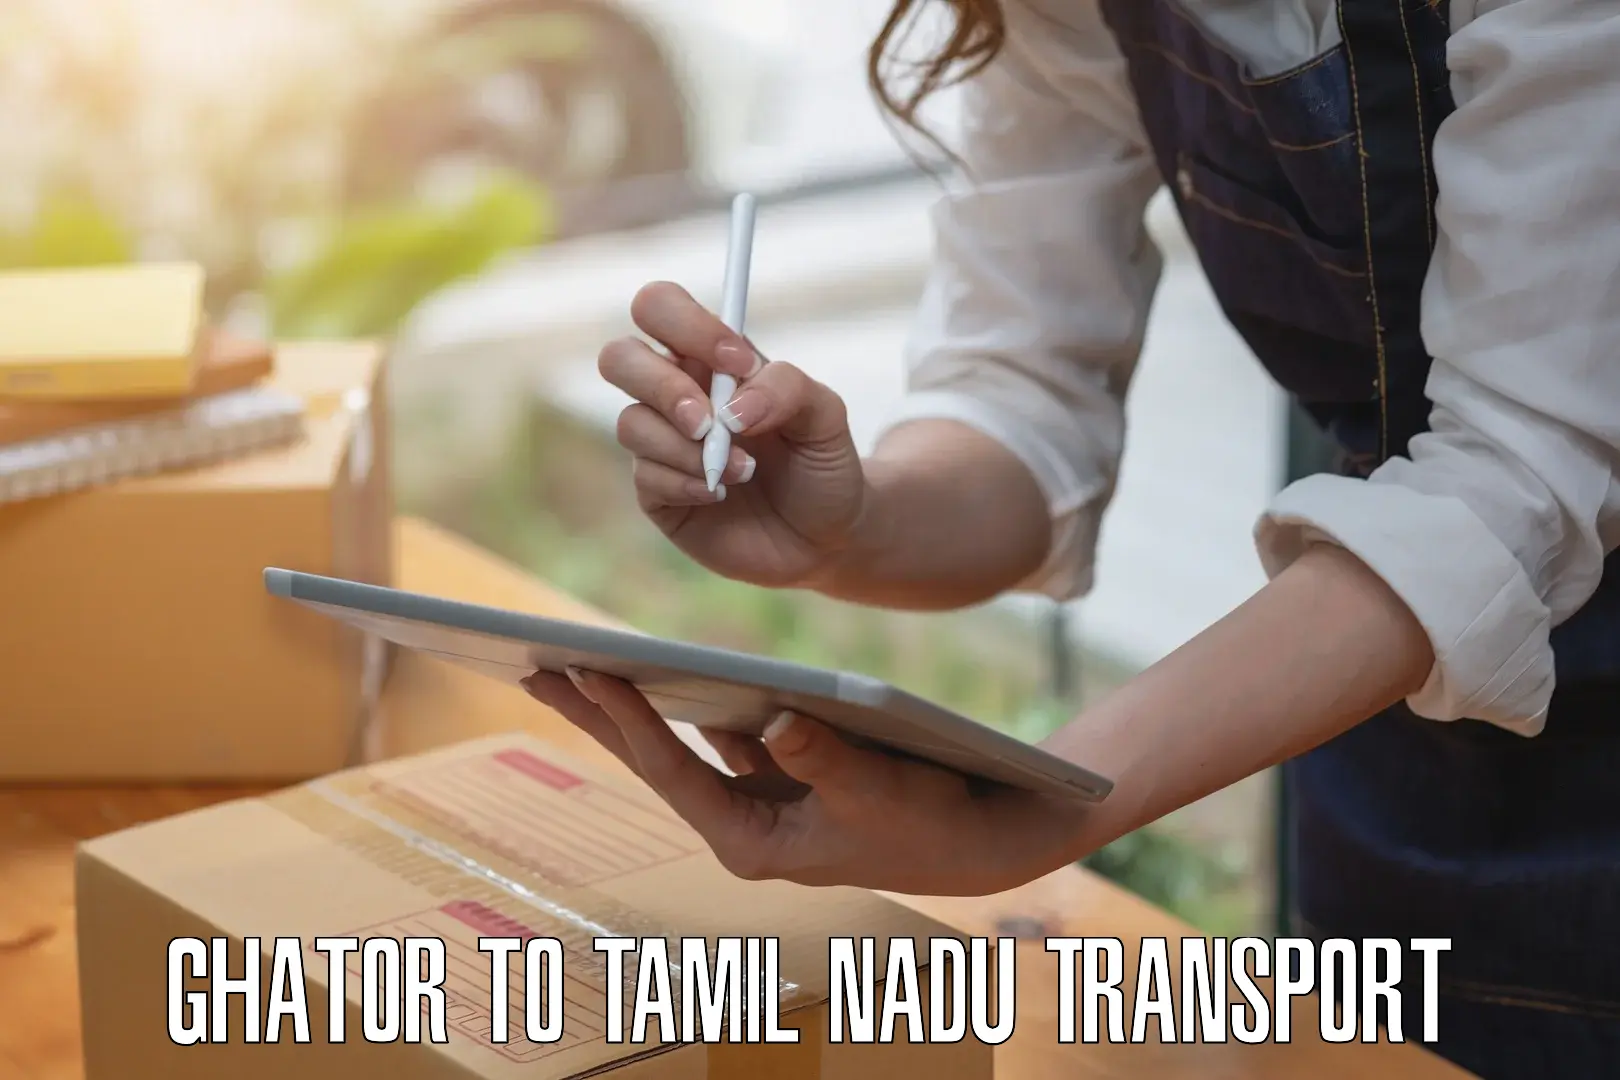 Part load transport service in India Ghator to Chennai